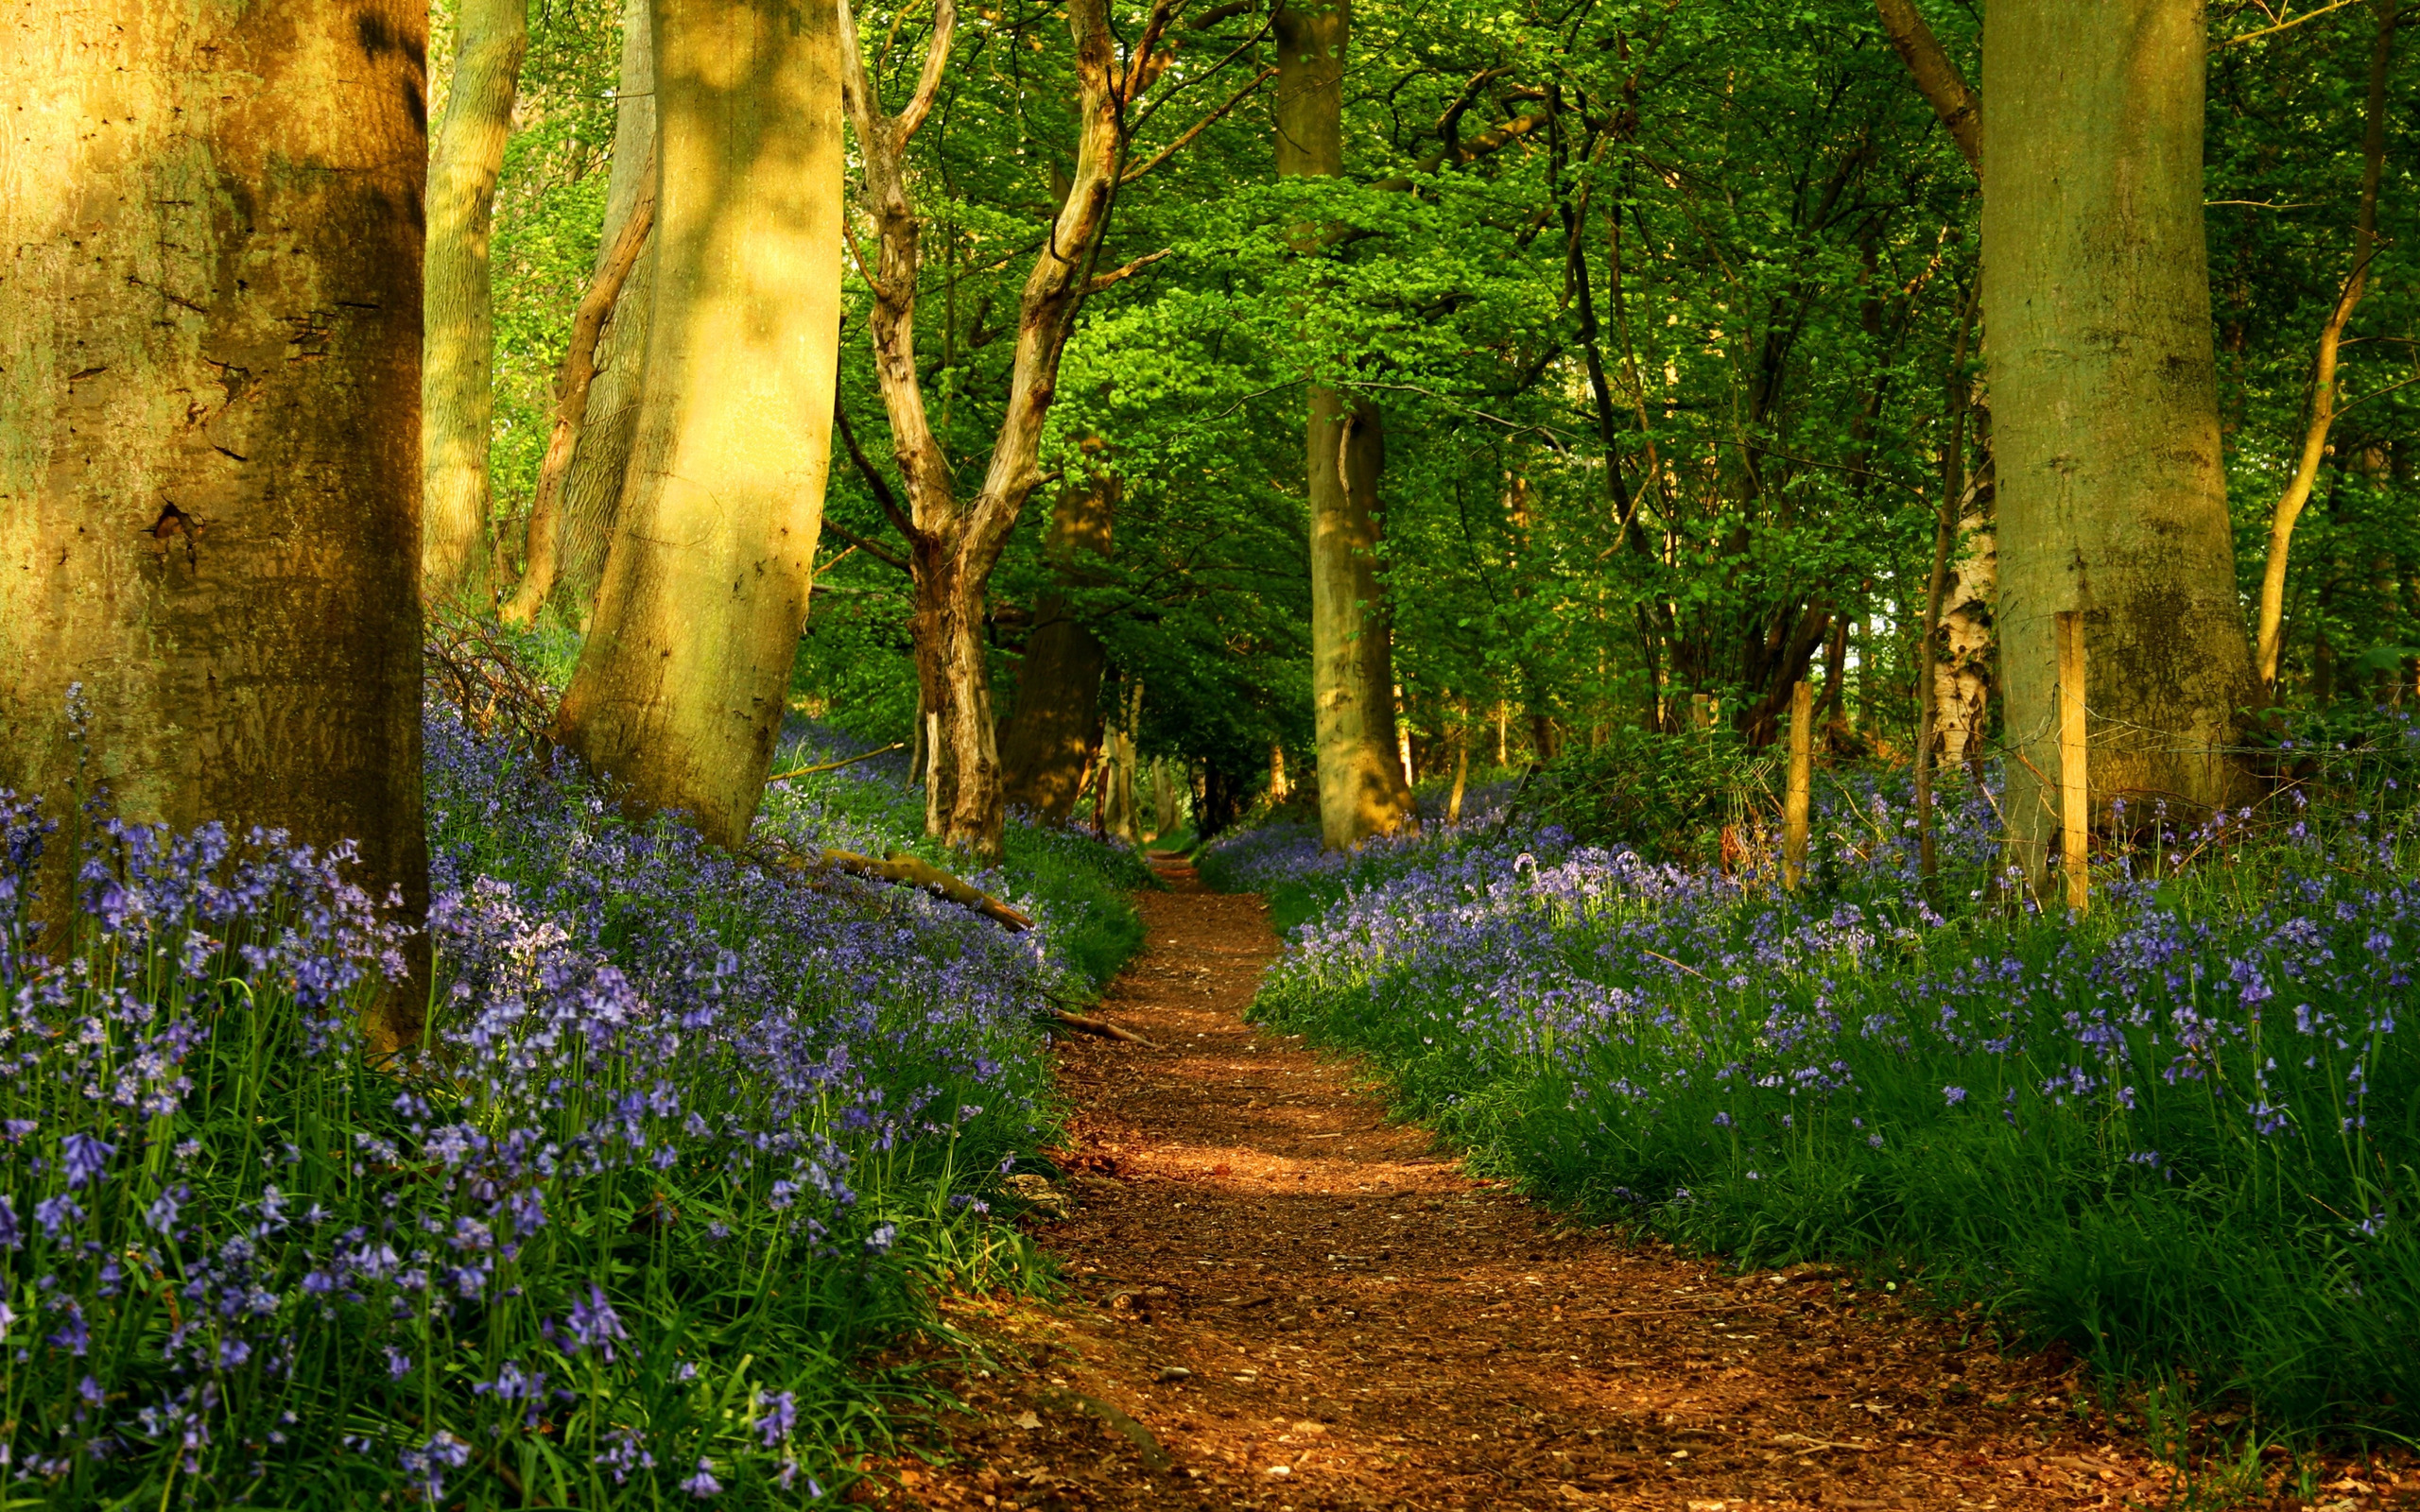 A serene forest path in nature, inviting you to explore The Secret Path.